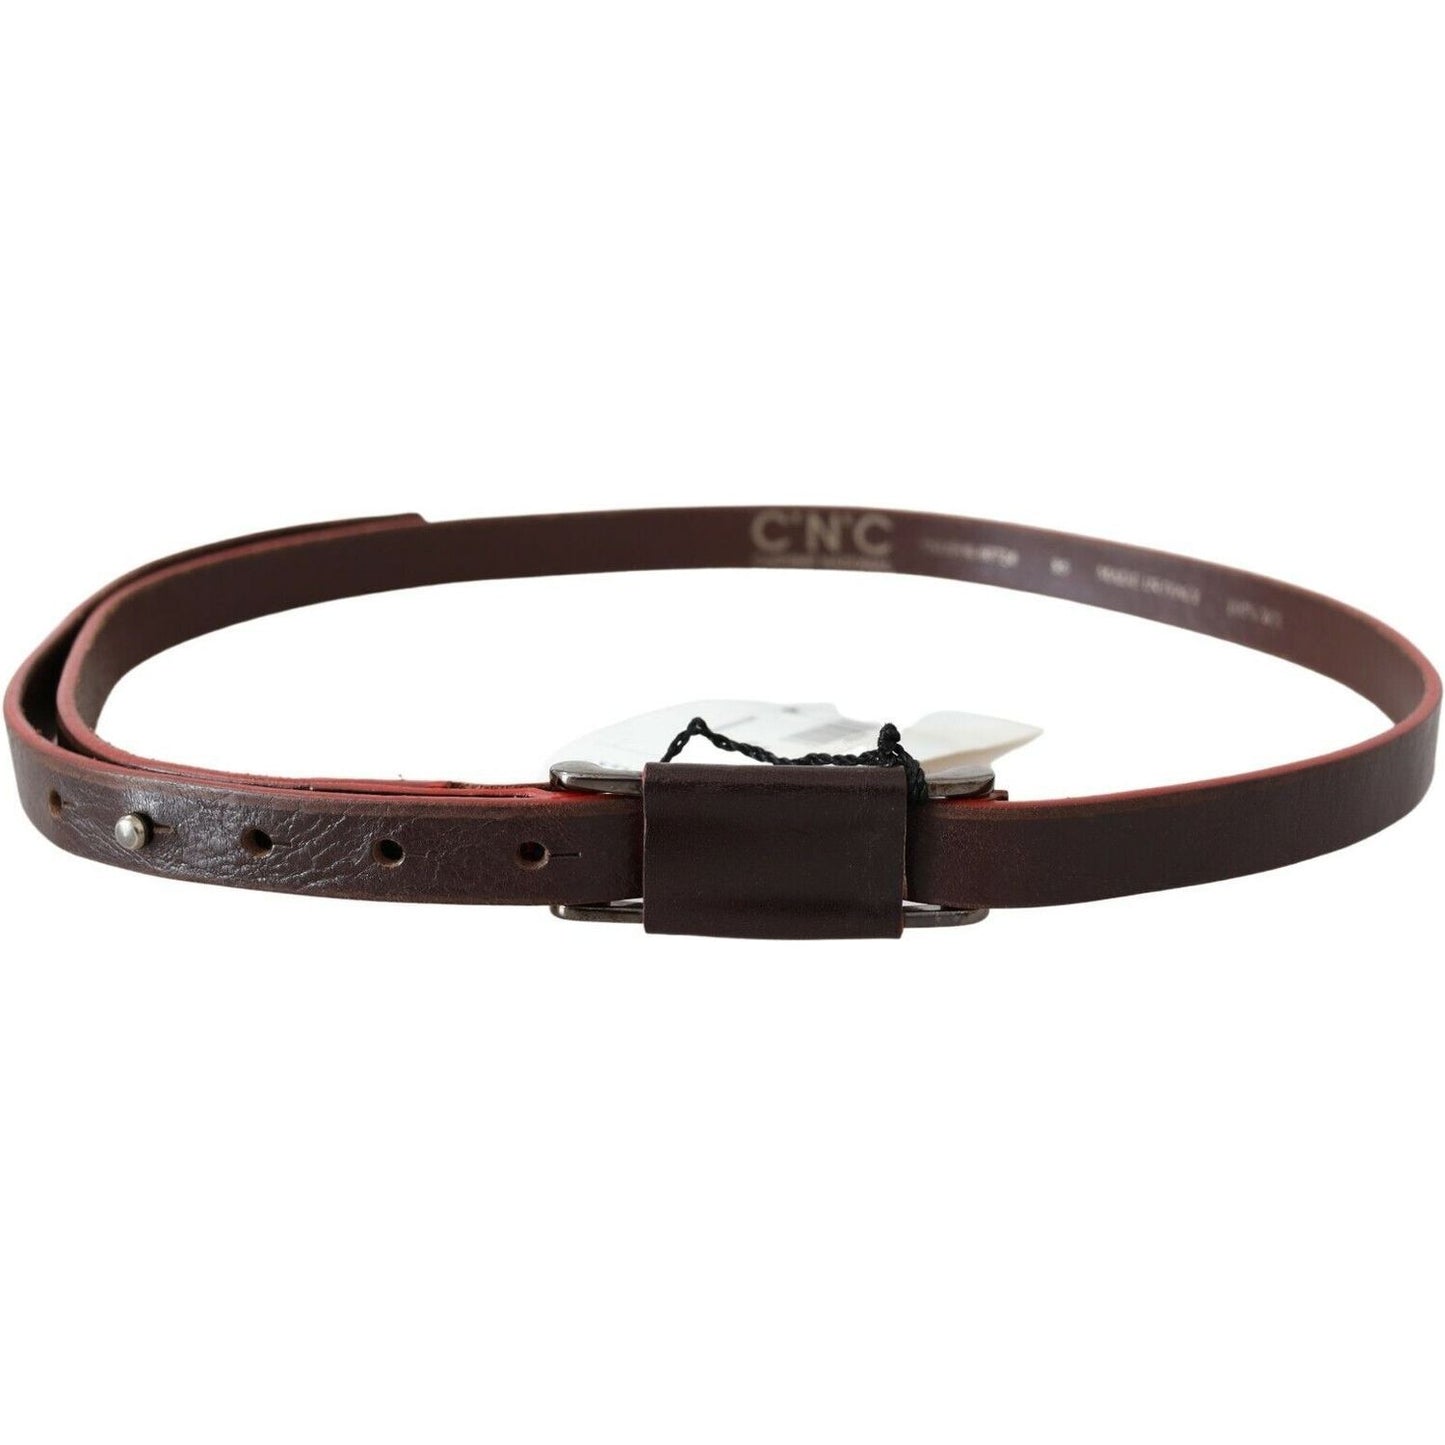 Costume National Elegant Brown Leather Fashion Belt WOMAN BELTS brown-leather-double-rustic-silver-buckle-belt